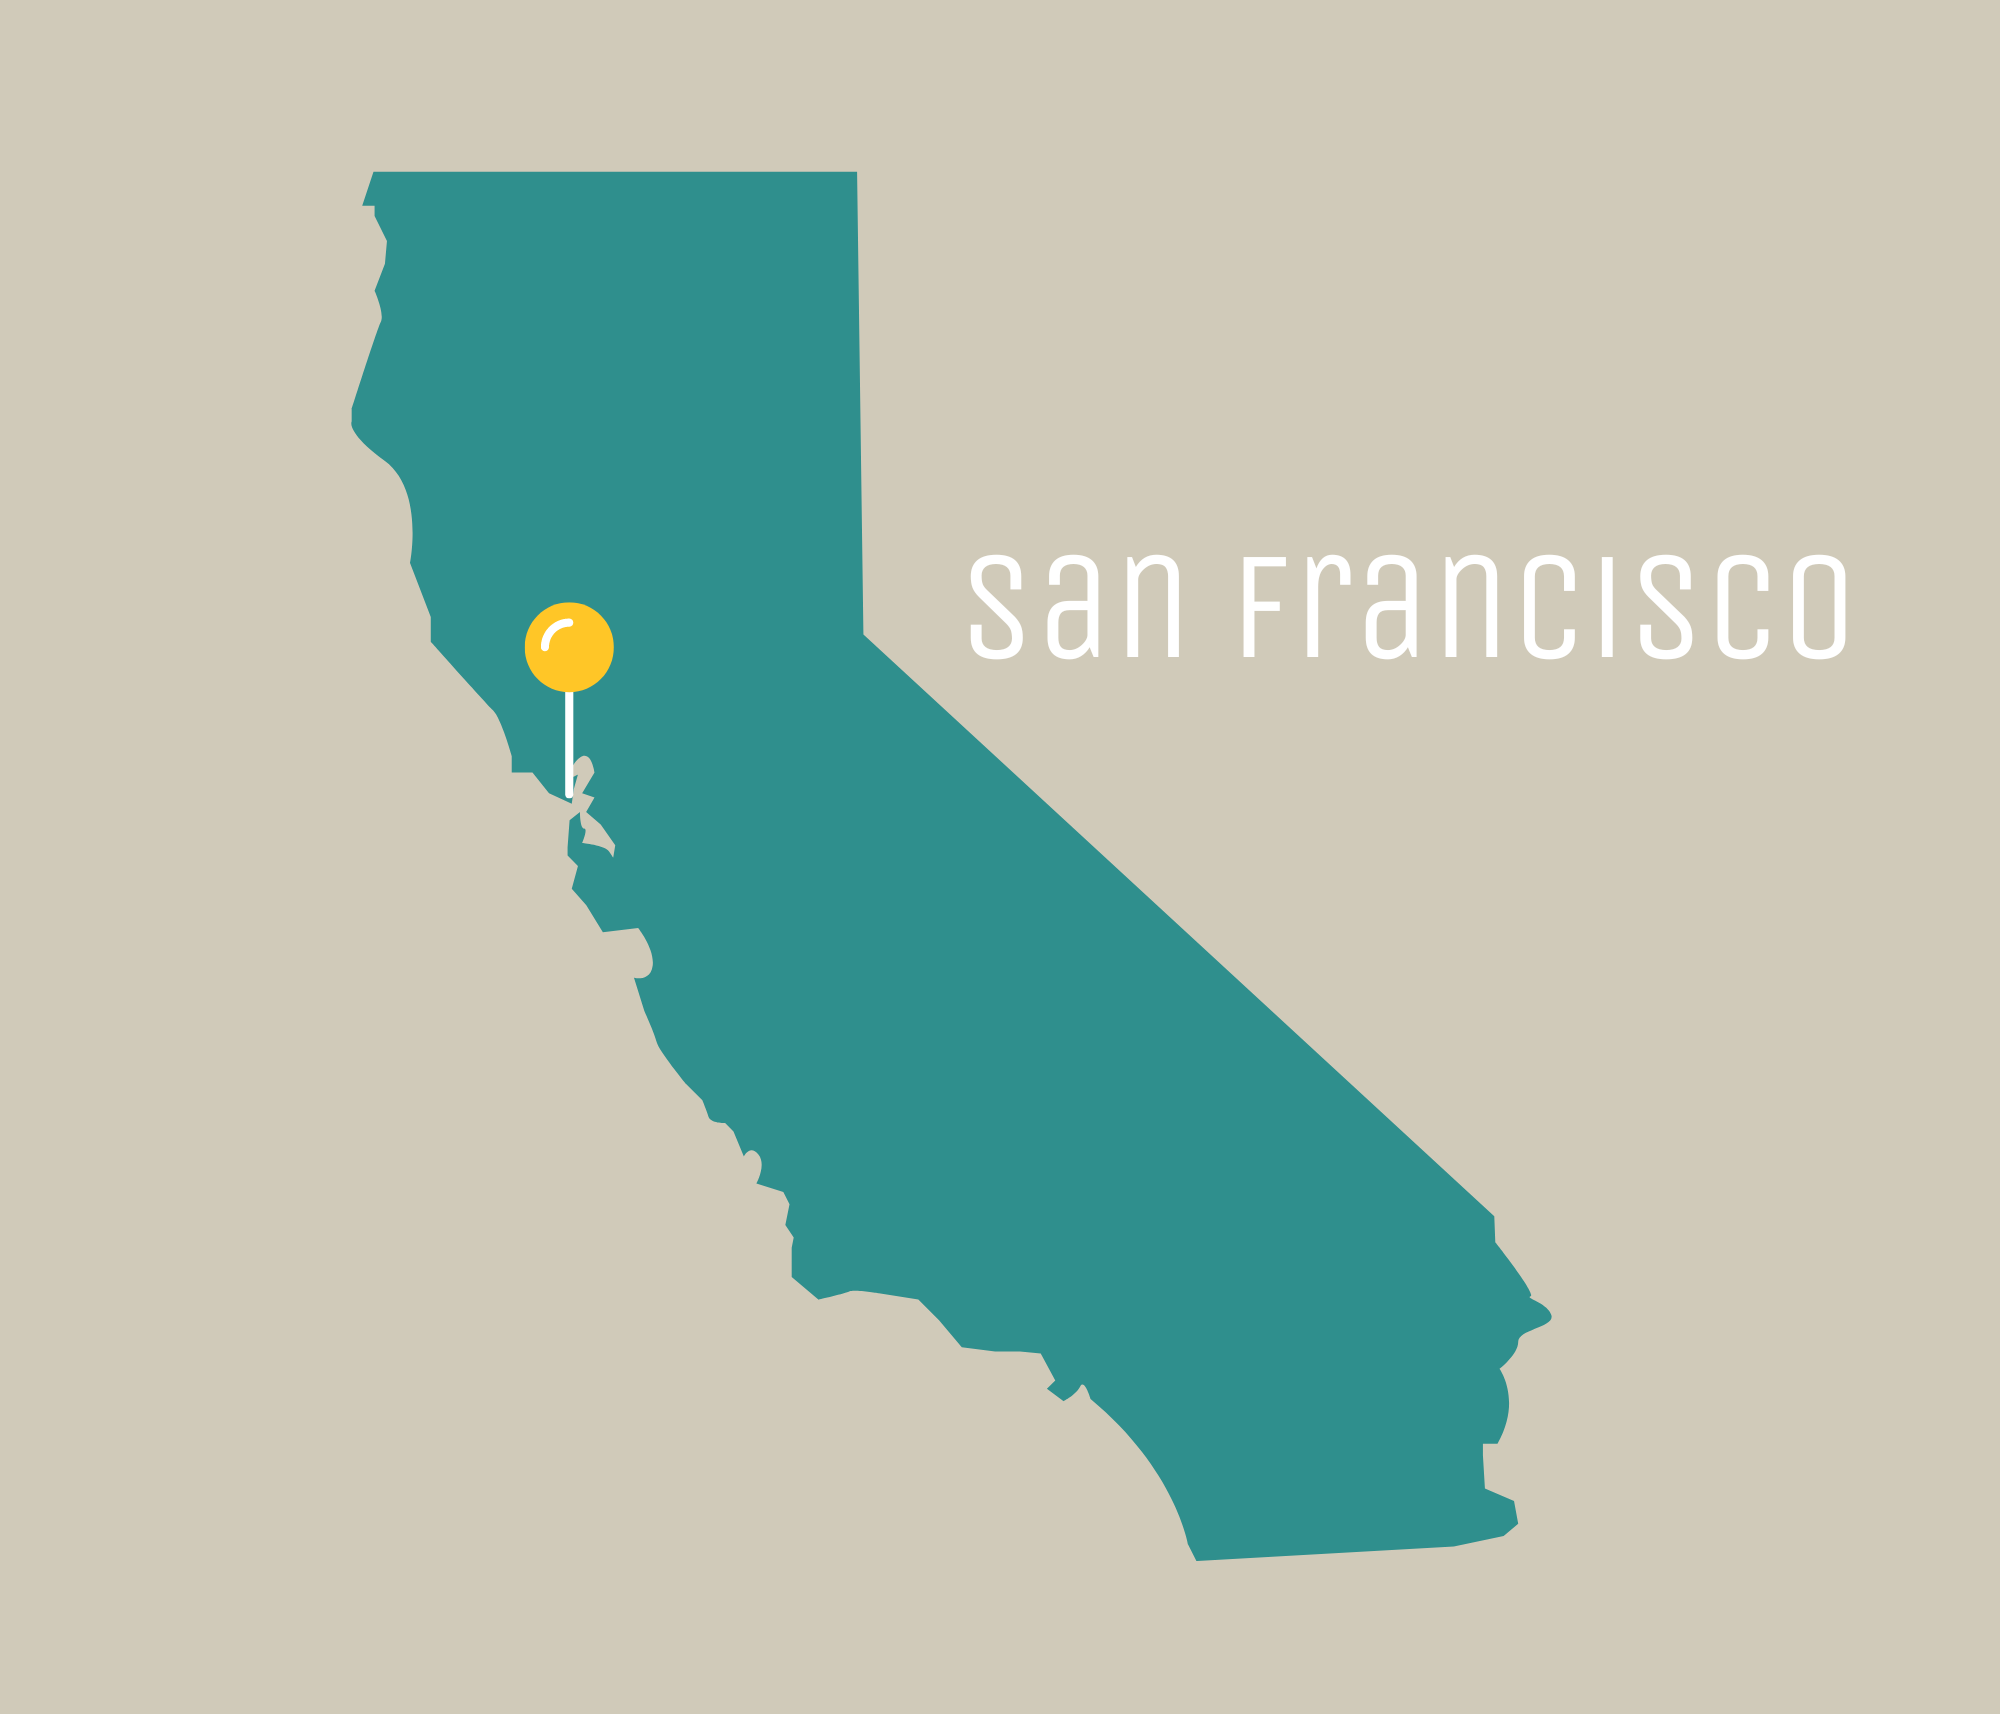 Yellow pin in the State of California where San Francisco is